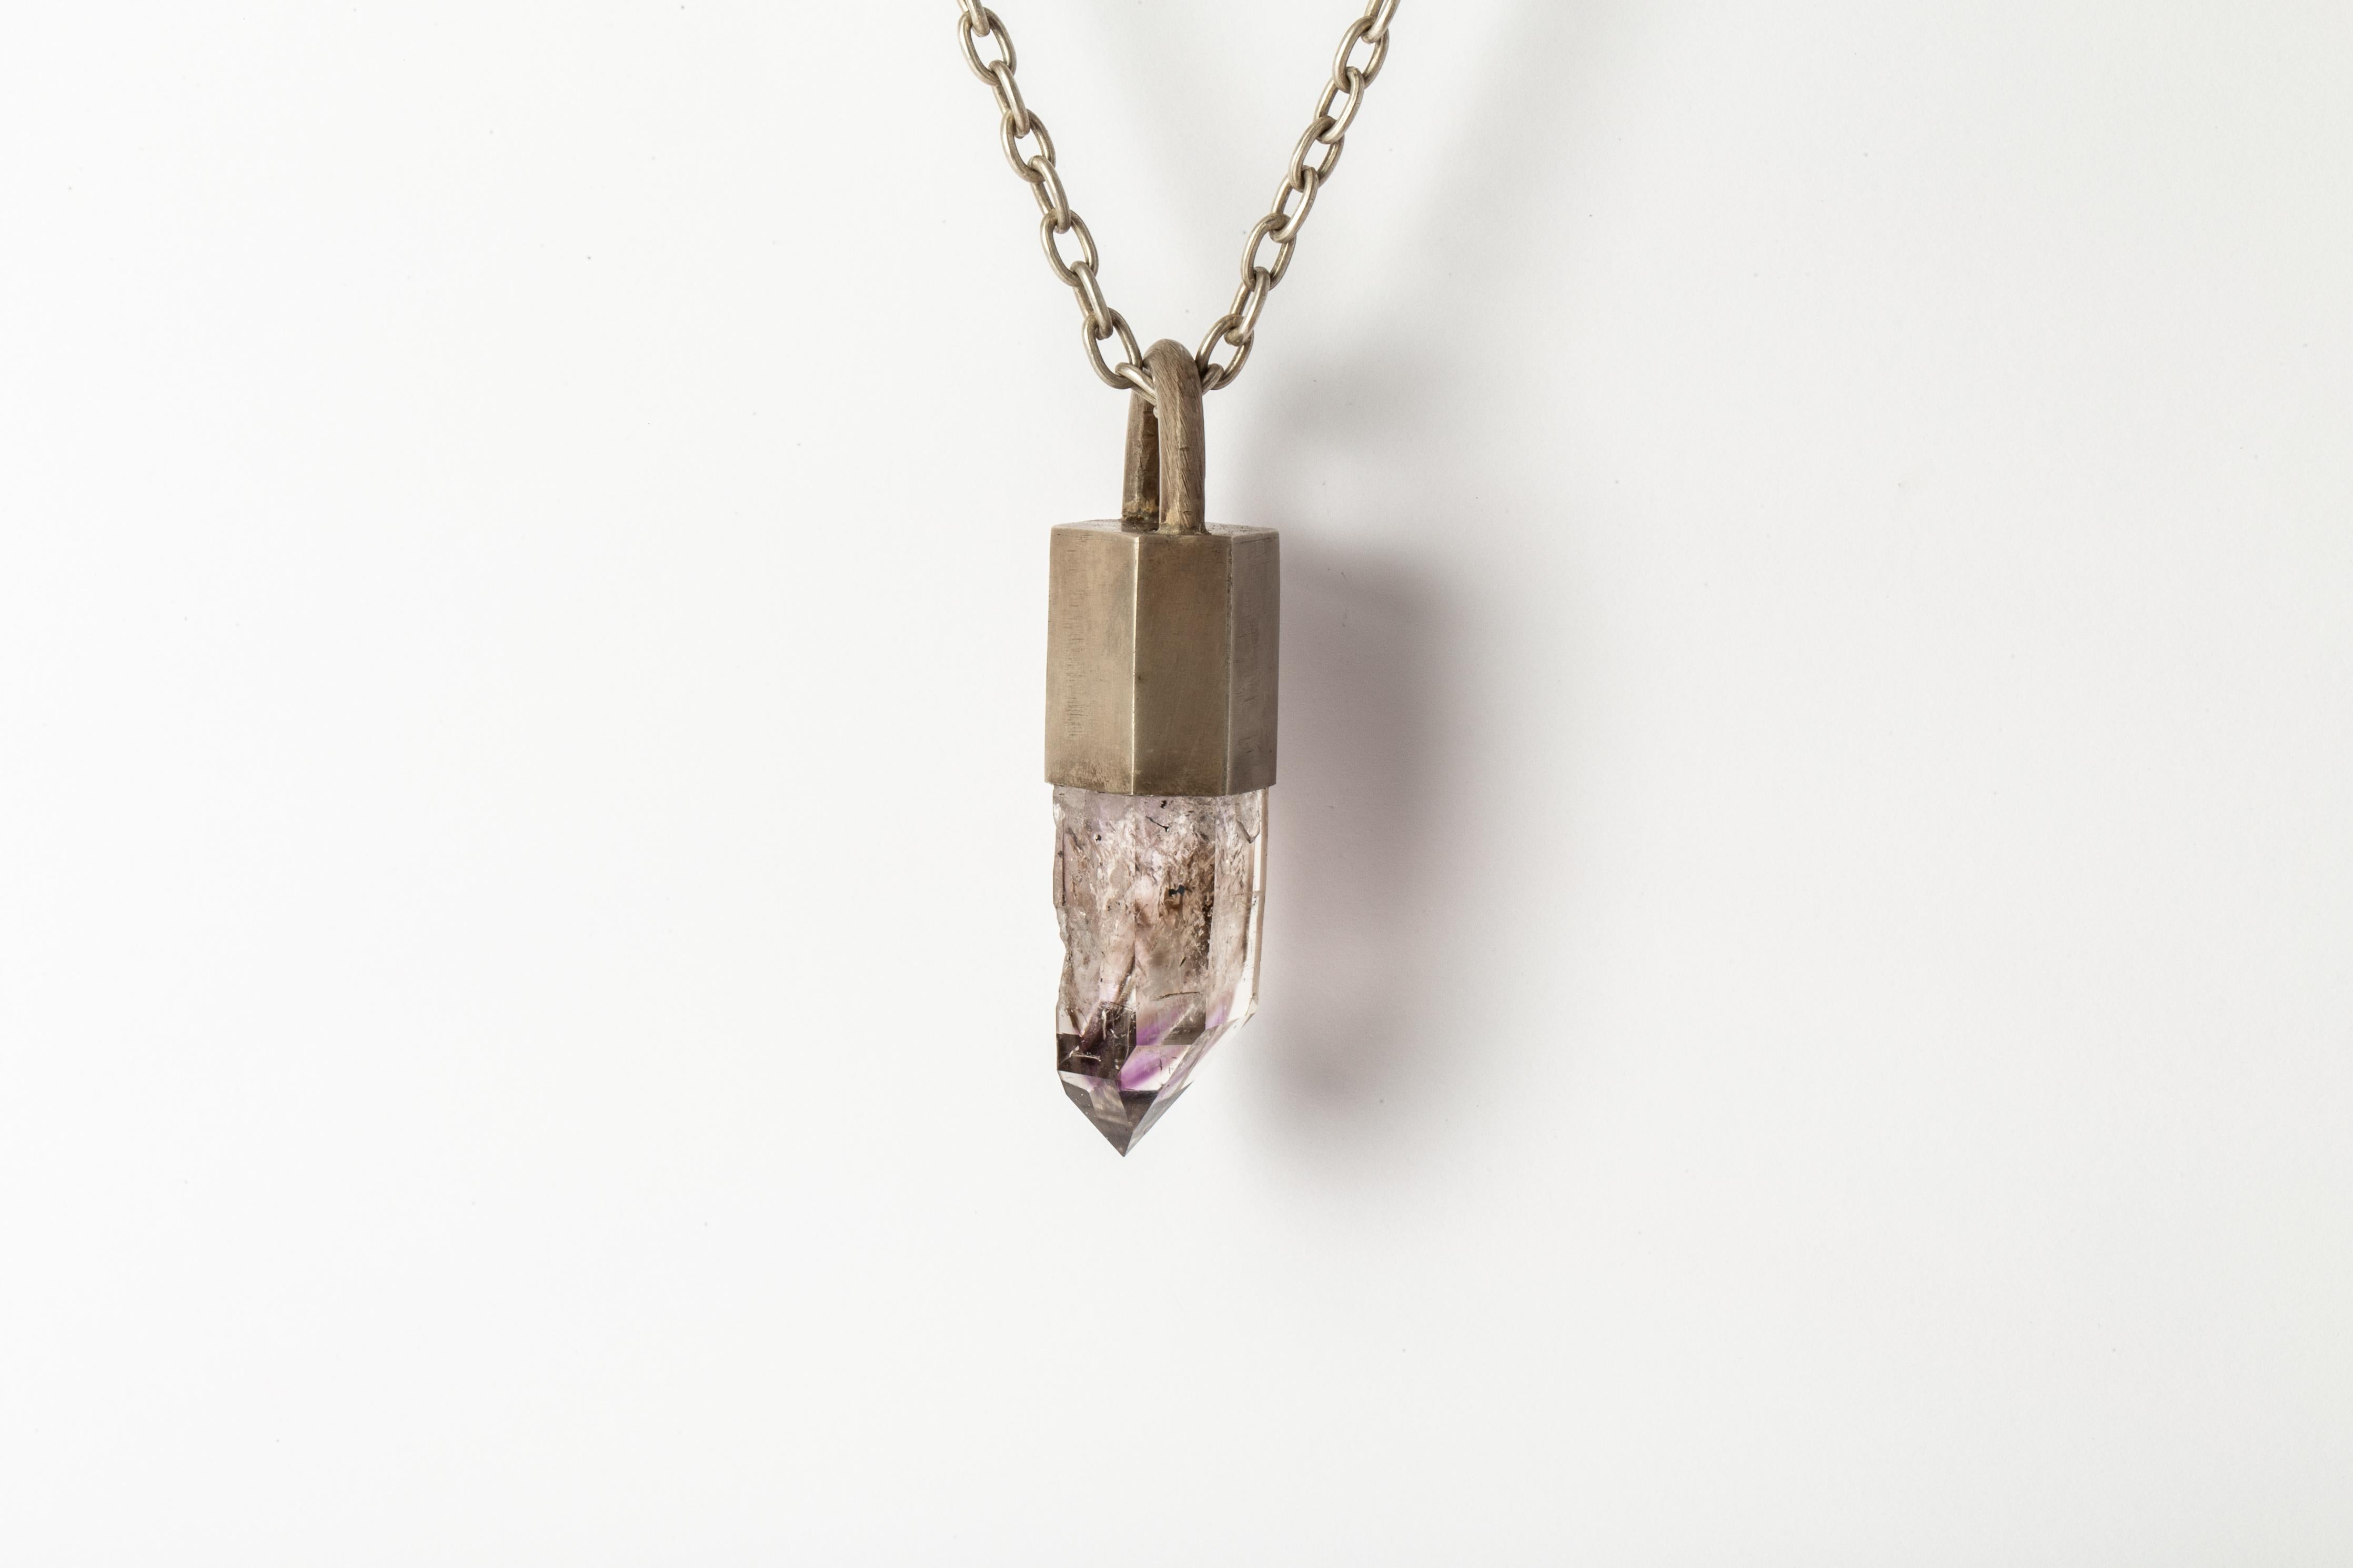 Talisman necklace in acid treated sterling silver and slab of brandberg quartz. The Talisman series is an exploration into the power of natural crystals. The crystals used in these pieces are discovered through adventure and are hand selected. Each